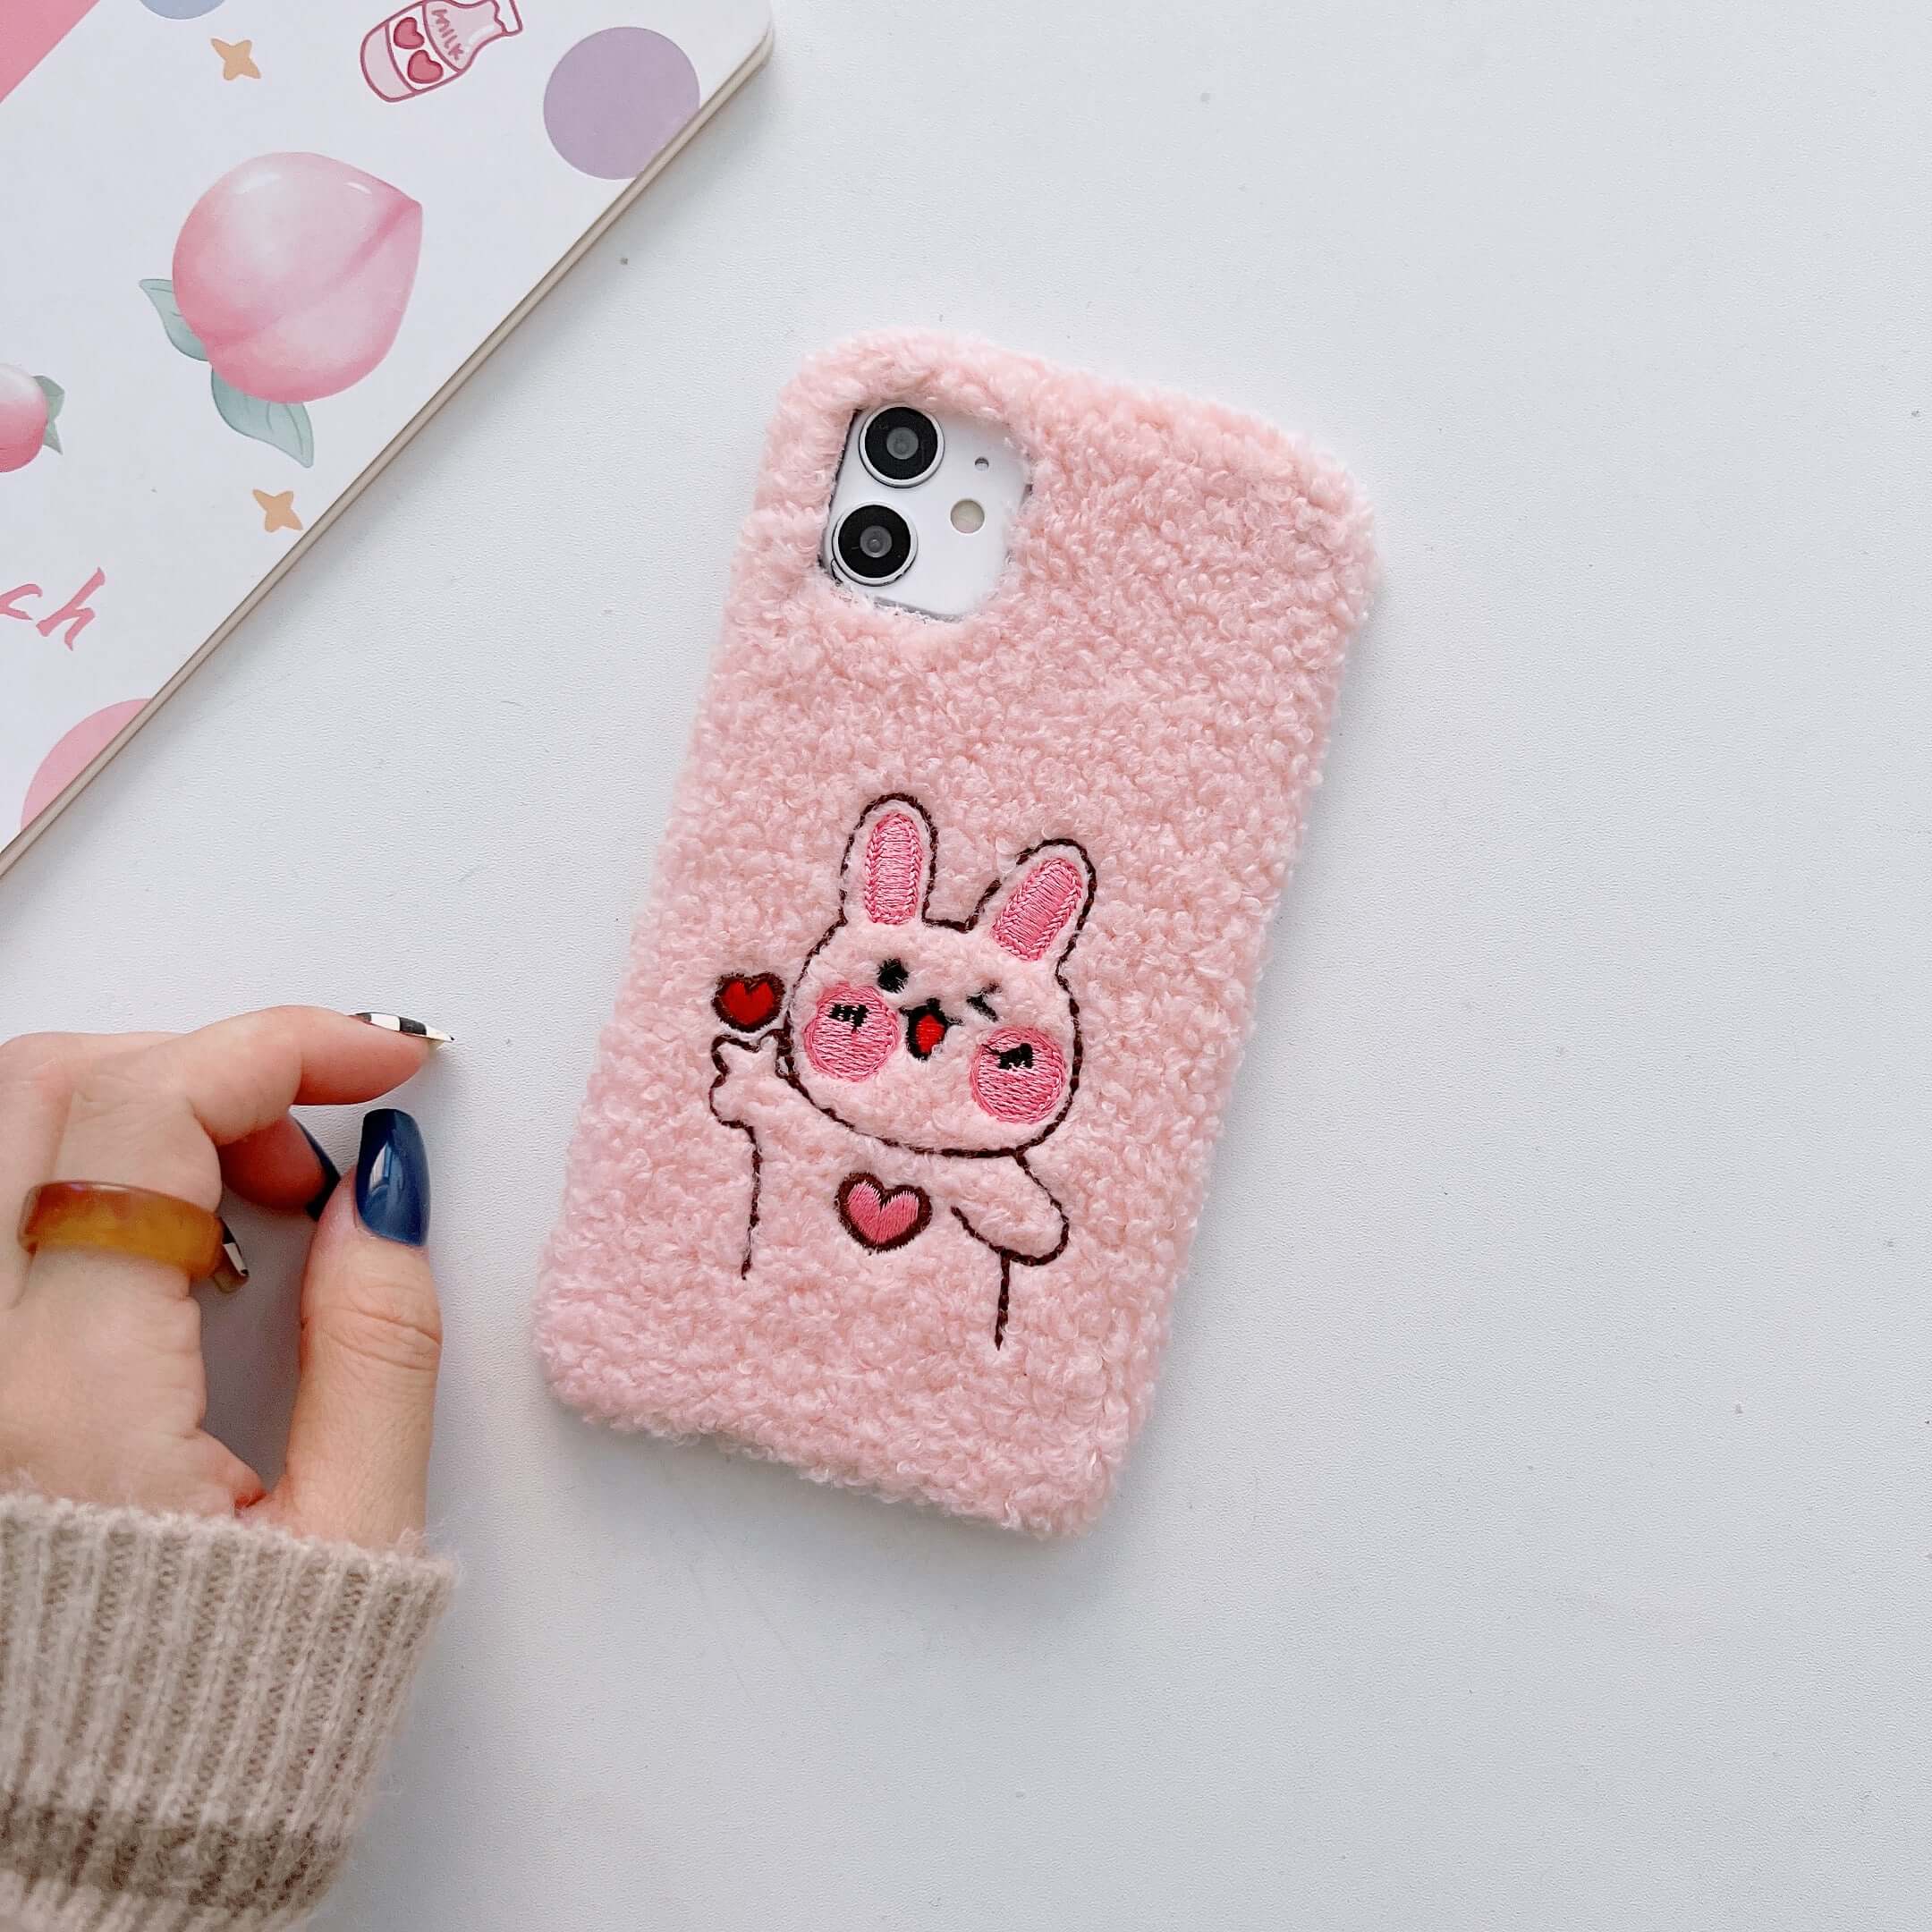 Online Shop for Phone Cases, Accessories And More